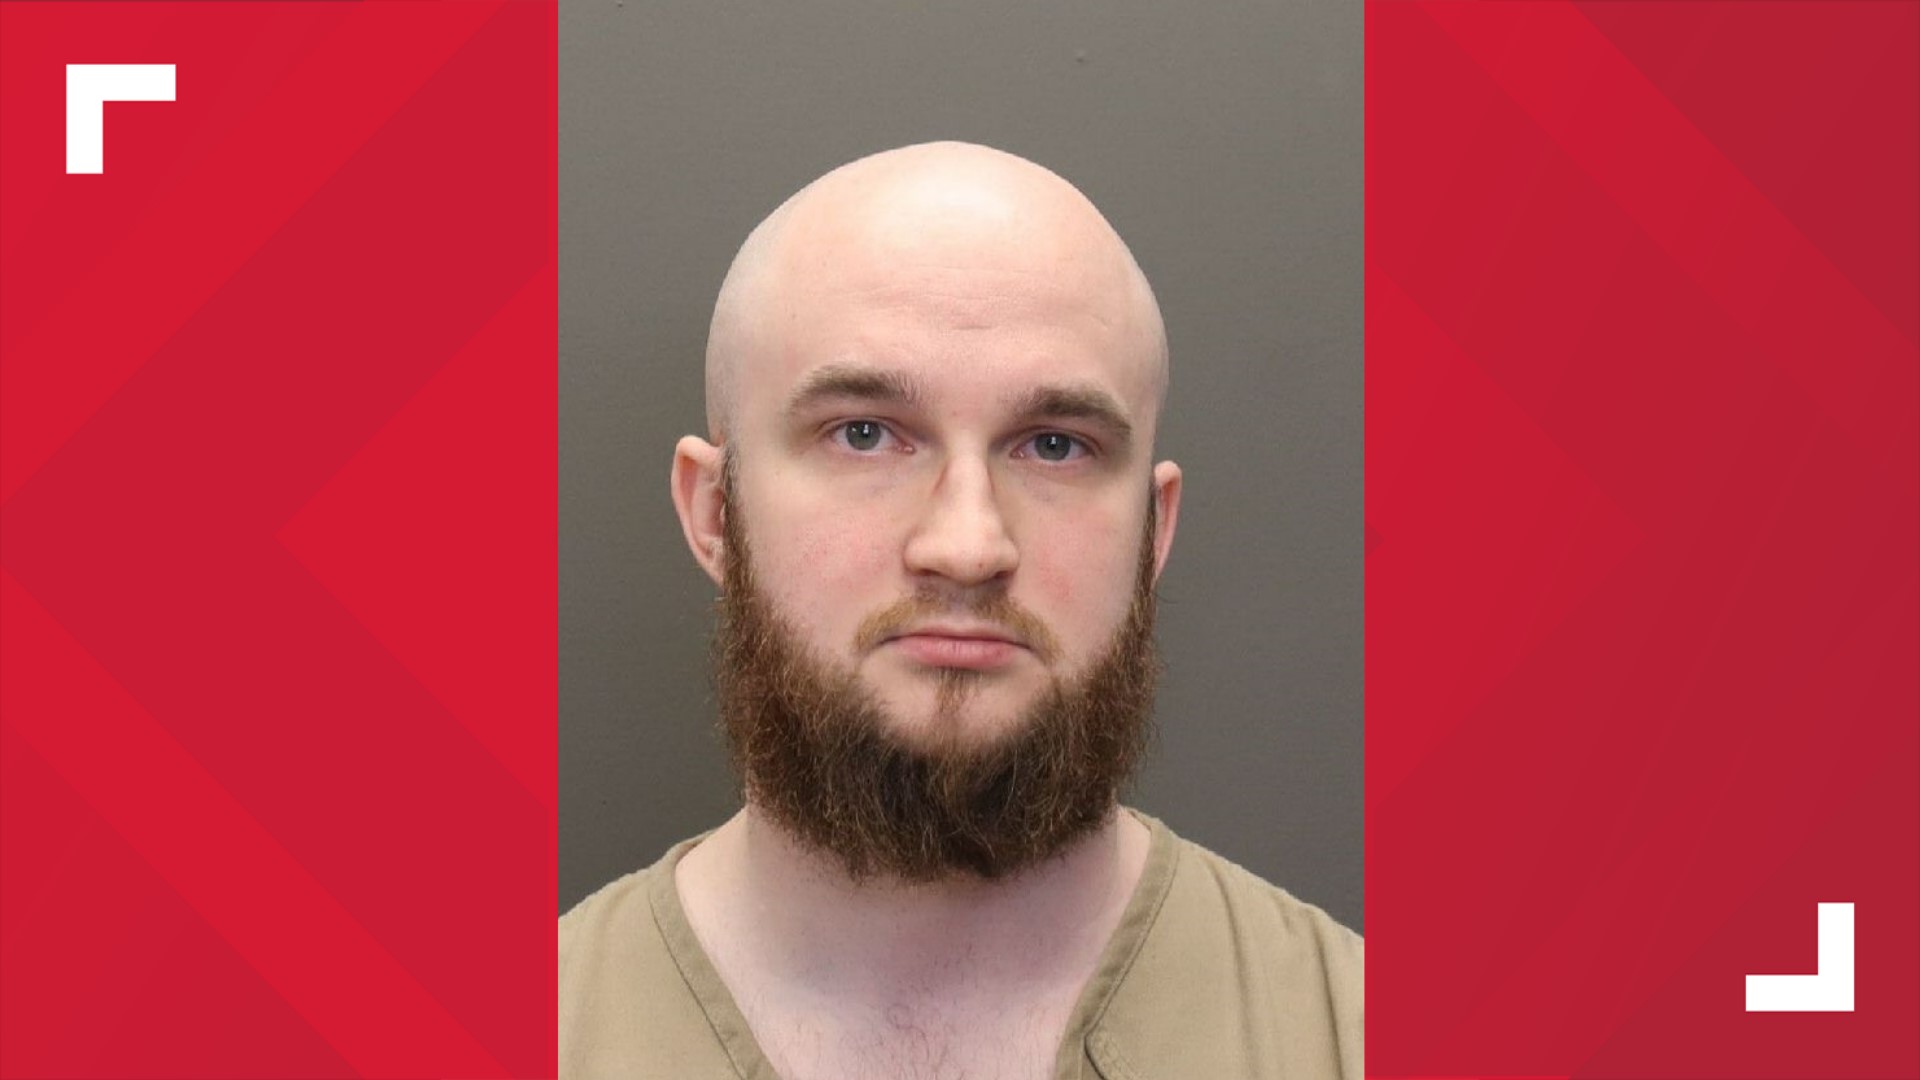 David Cantrell, 30, is accused of engaging in sexual conduct with a 4-year-old girl at The Nest Schools day care and preschool on Dempsey Road in Westerville.